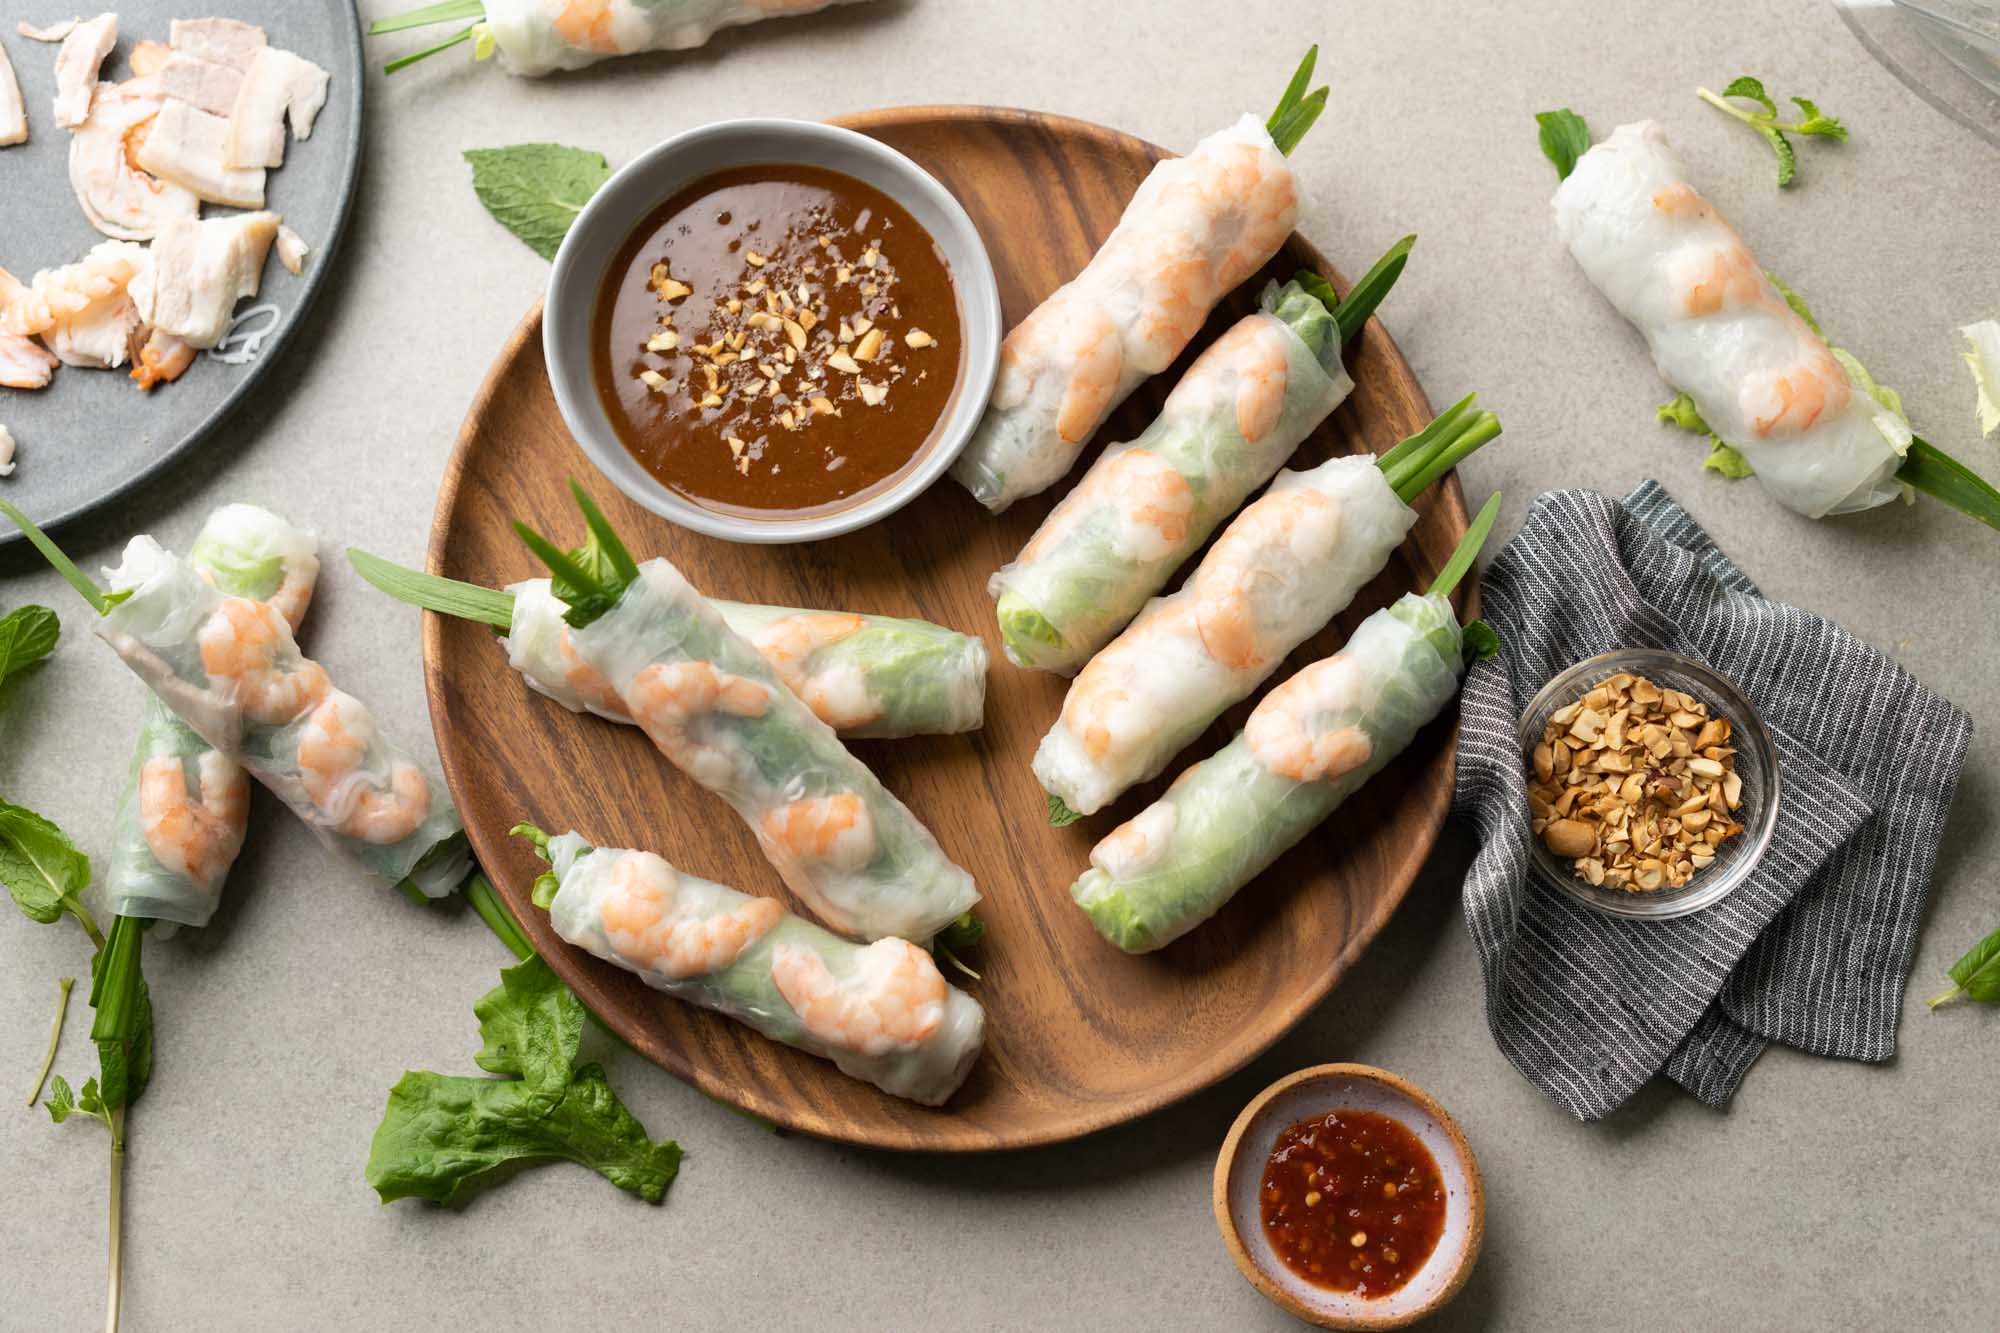 How to Make Fresh Spring Rolls